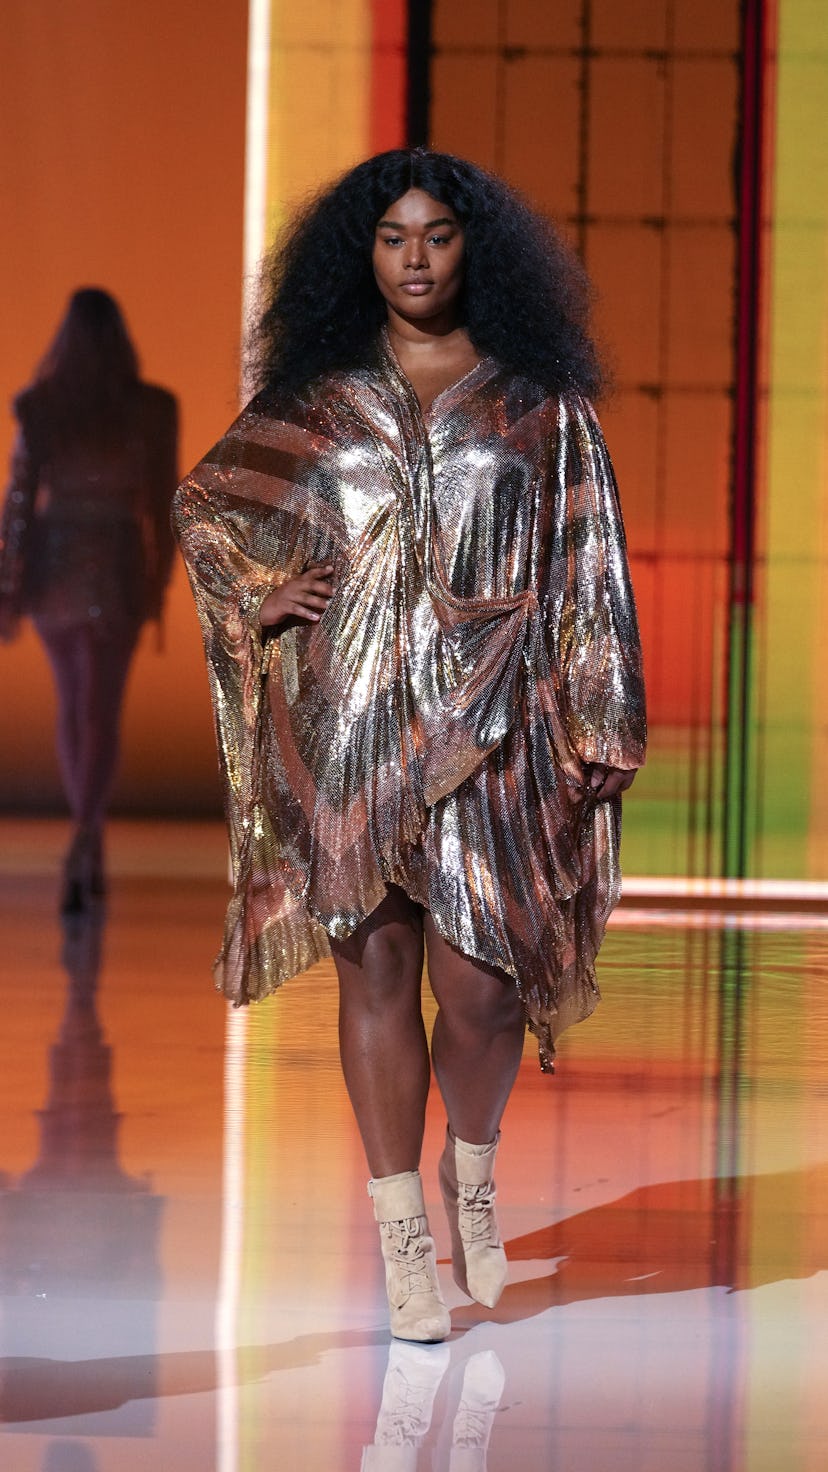 See Paris Fashion Week 2021's top trends from 2000s metallic and cut-outs to '60s mod and carwash dr...